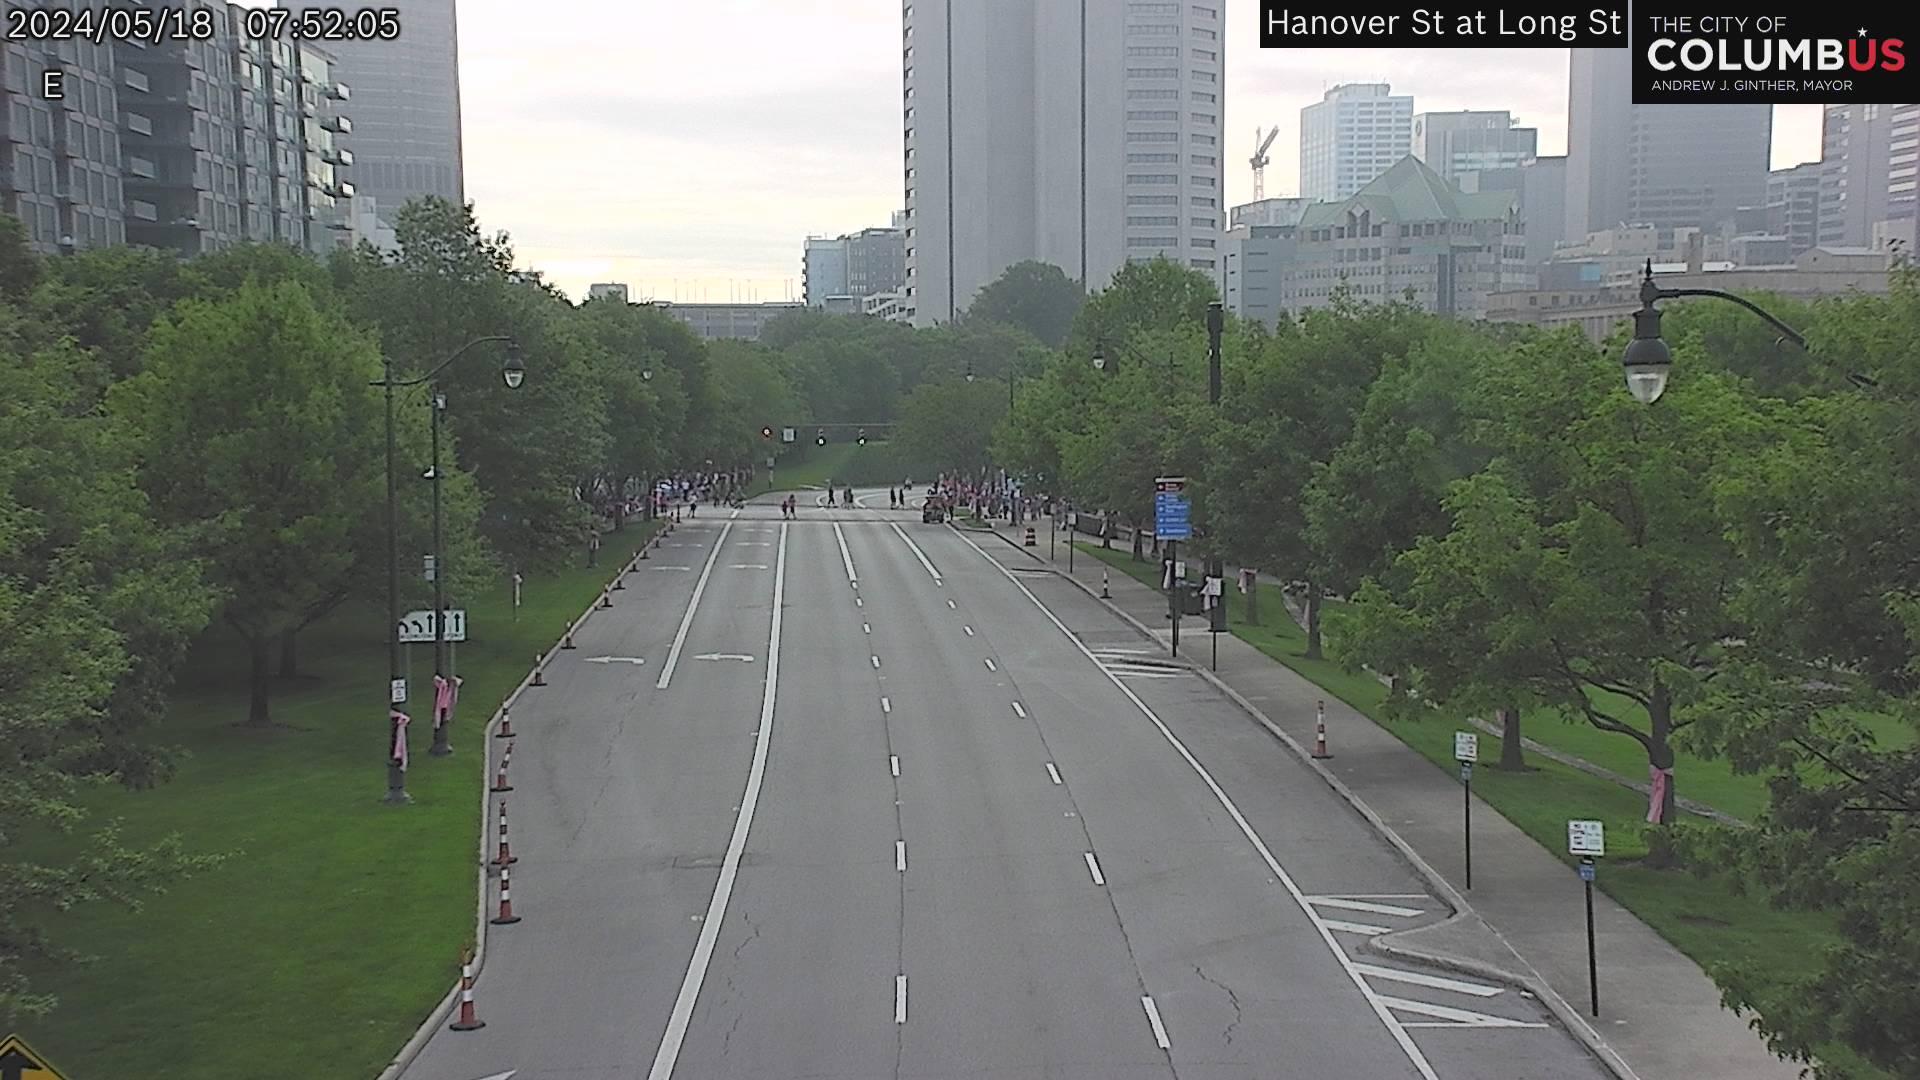 Traffic Cam Columbus: City of - Long St at Hanover St Player